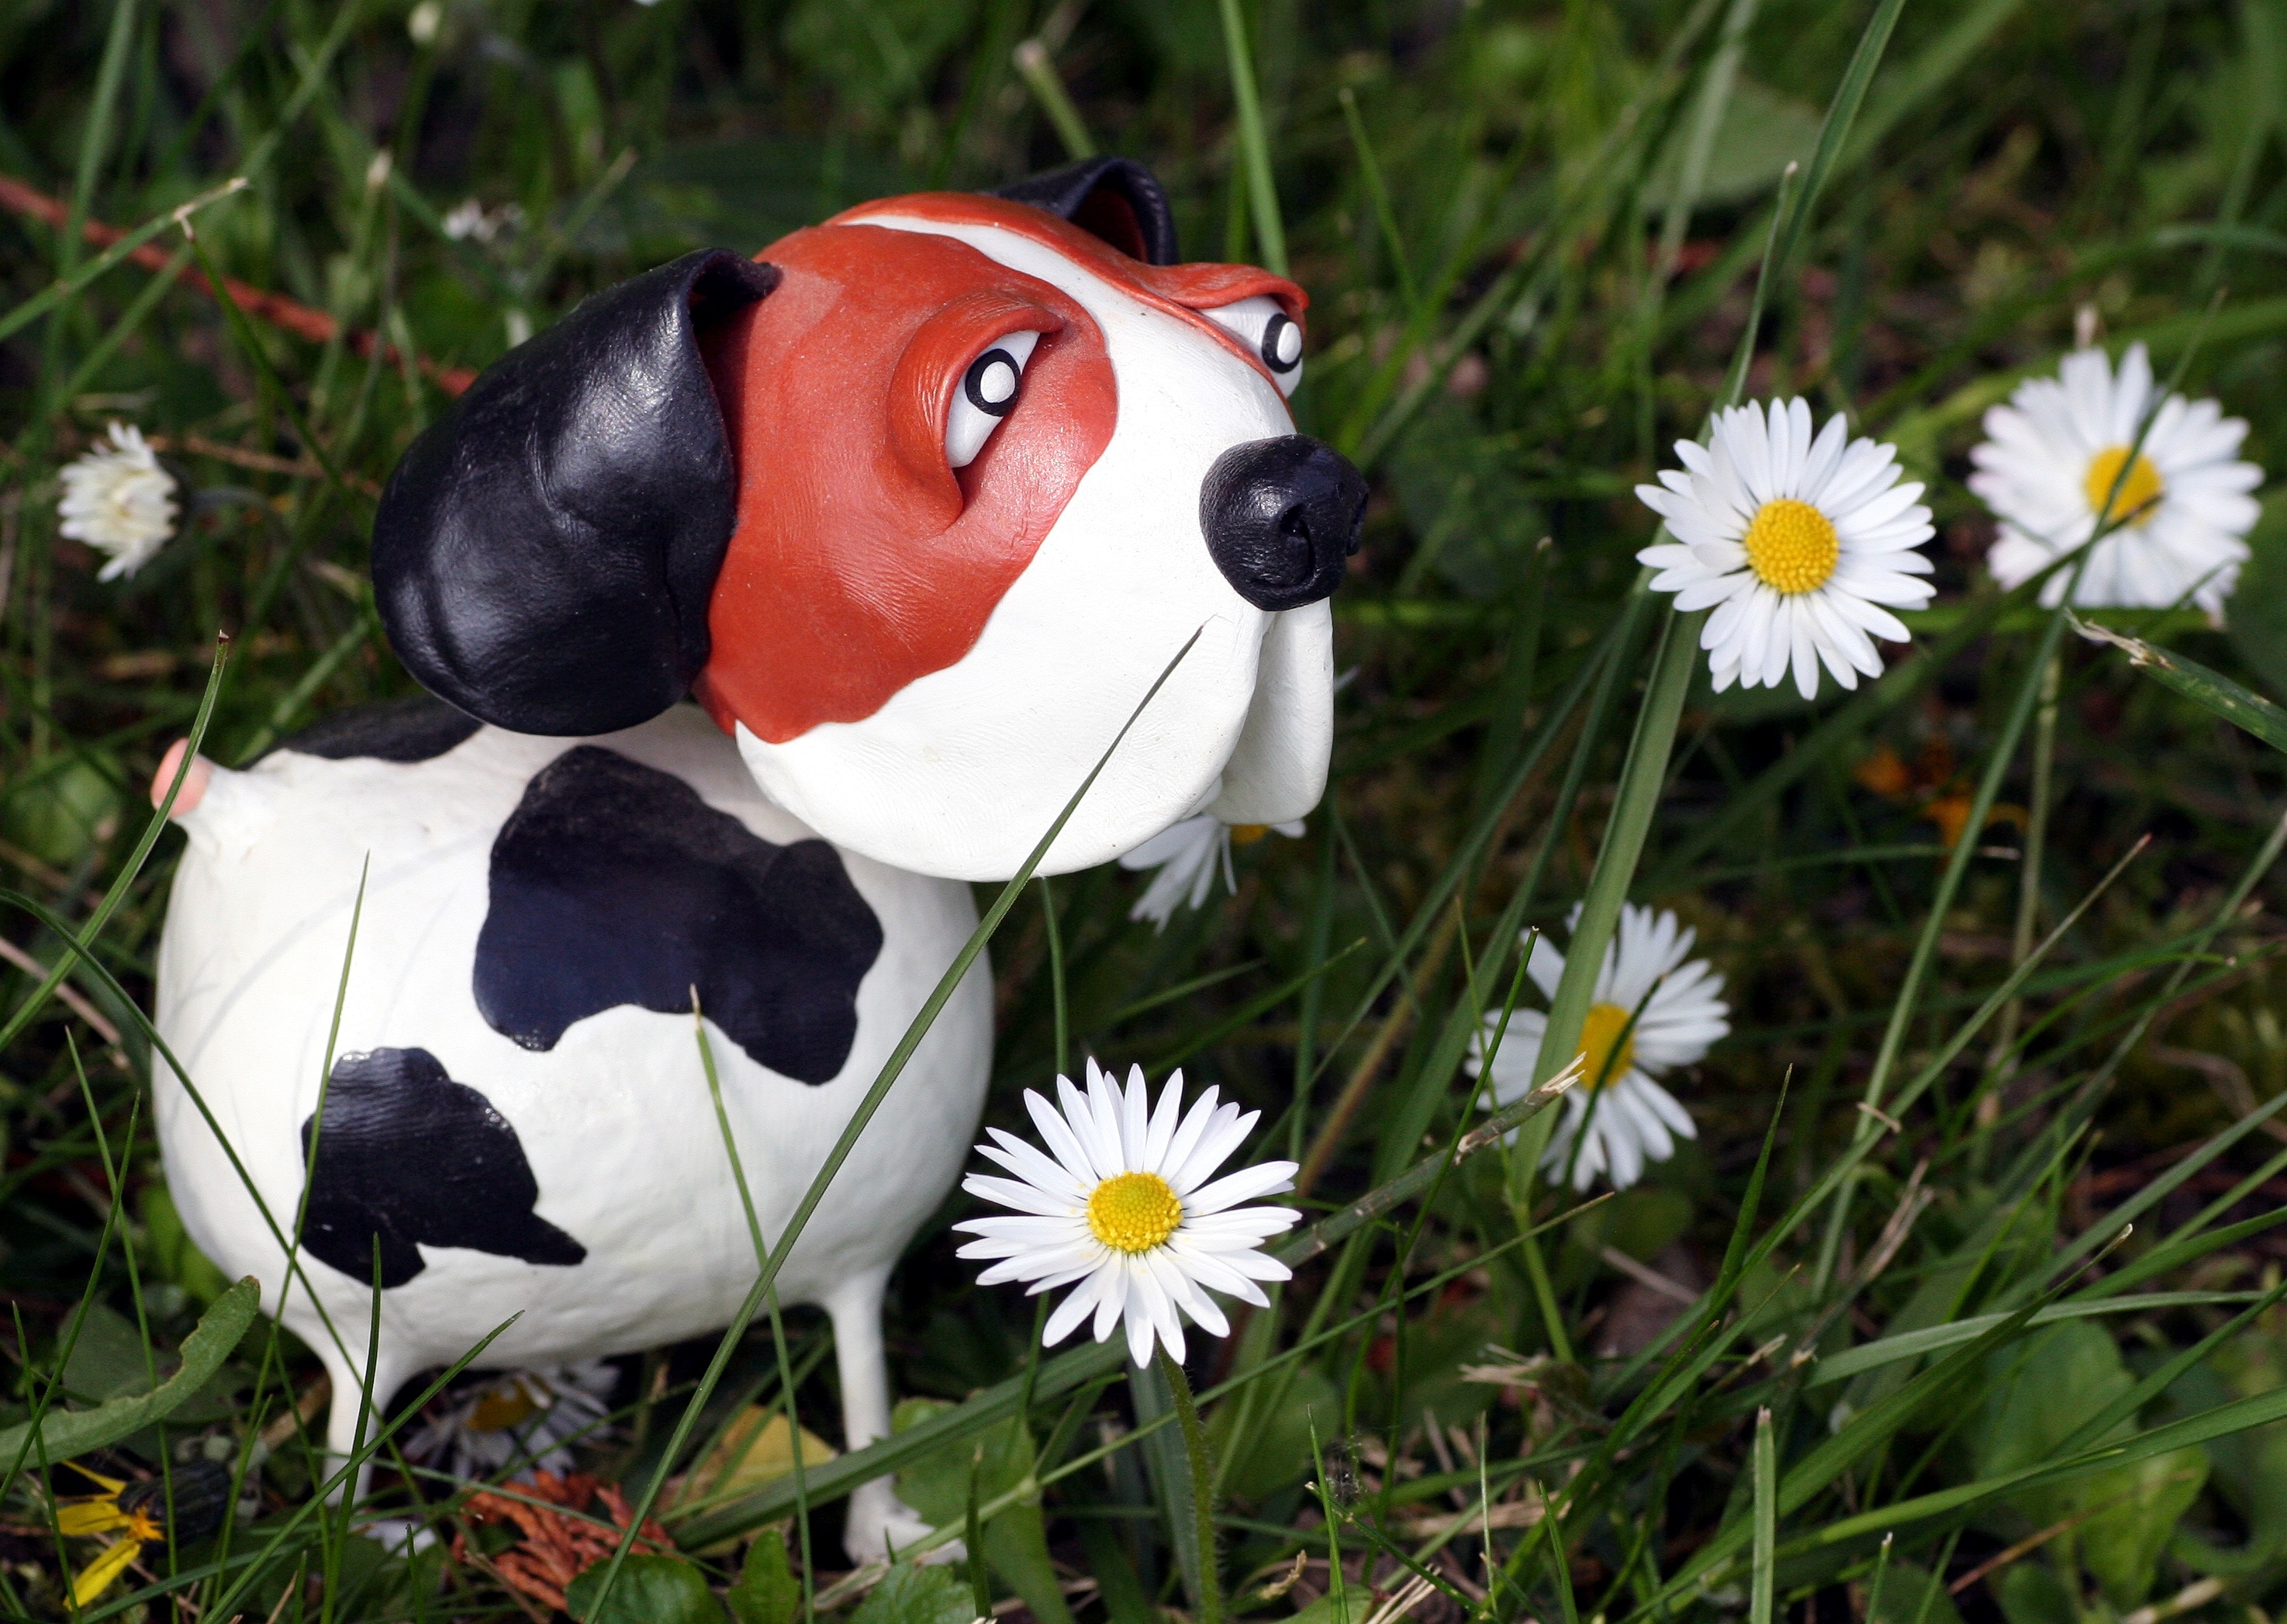 brown white and black dog figurine near with white daisy